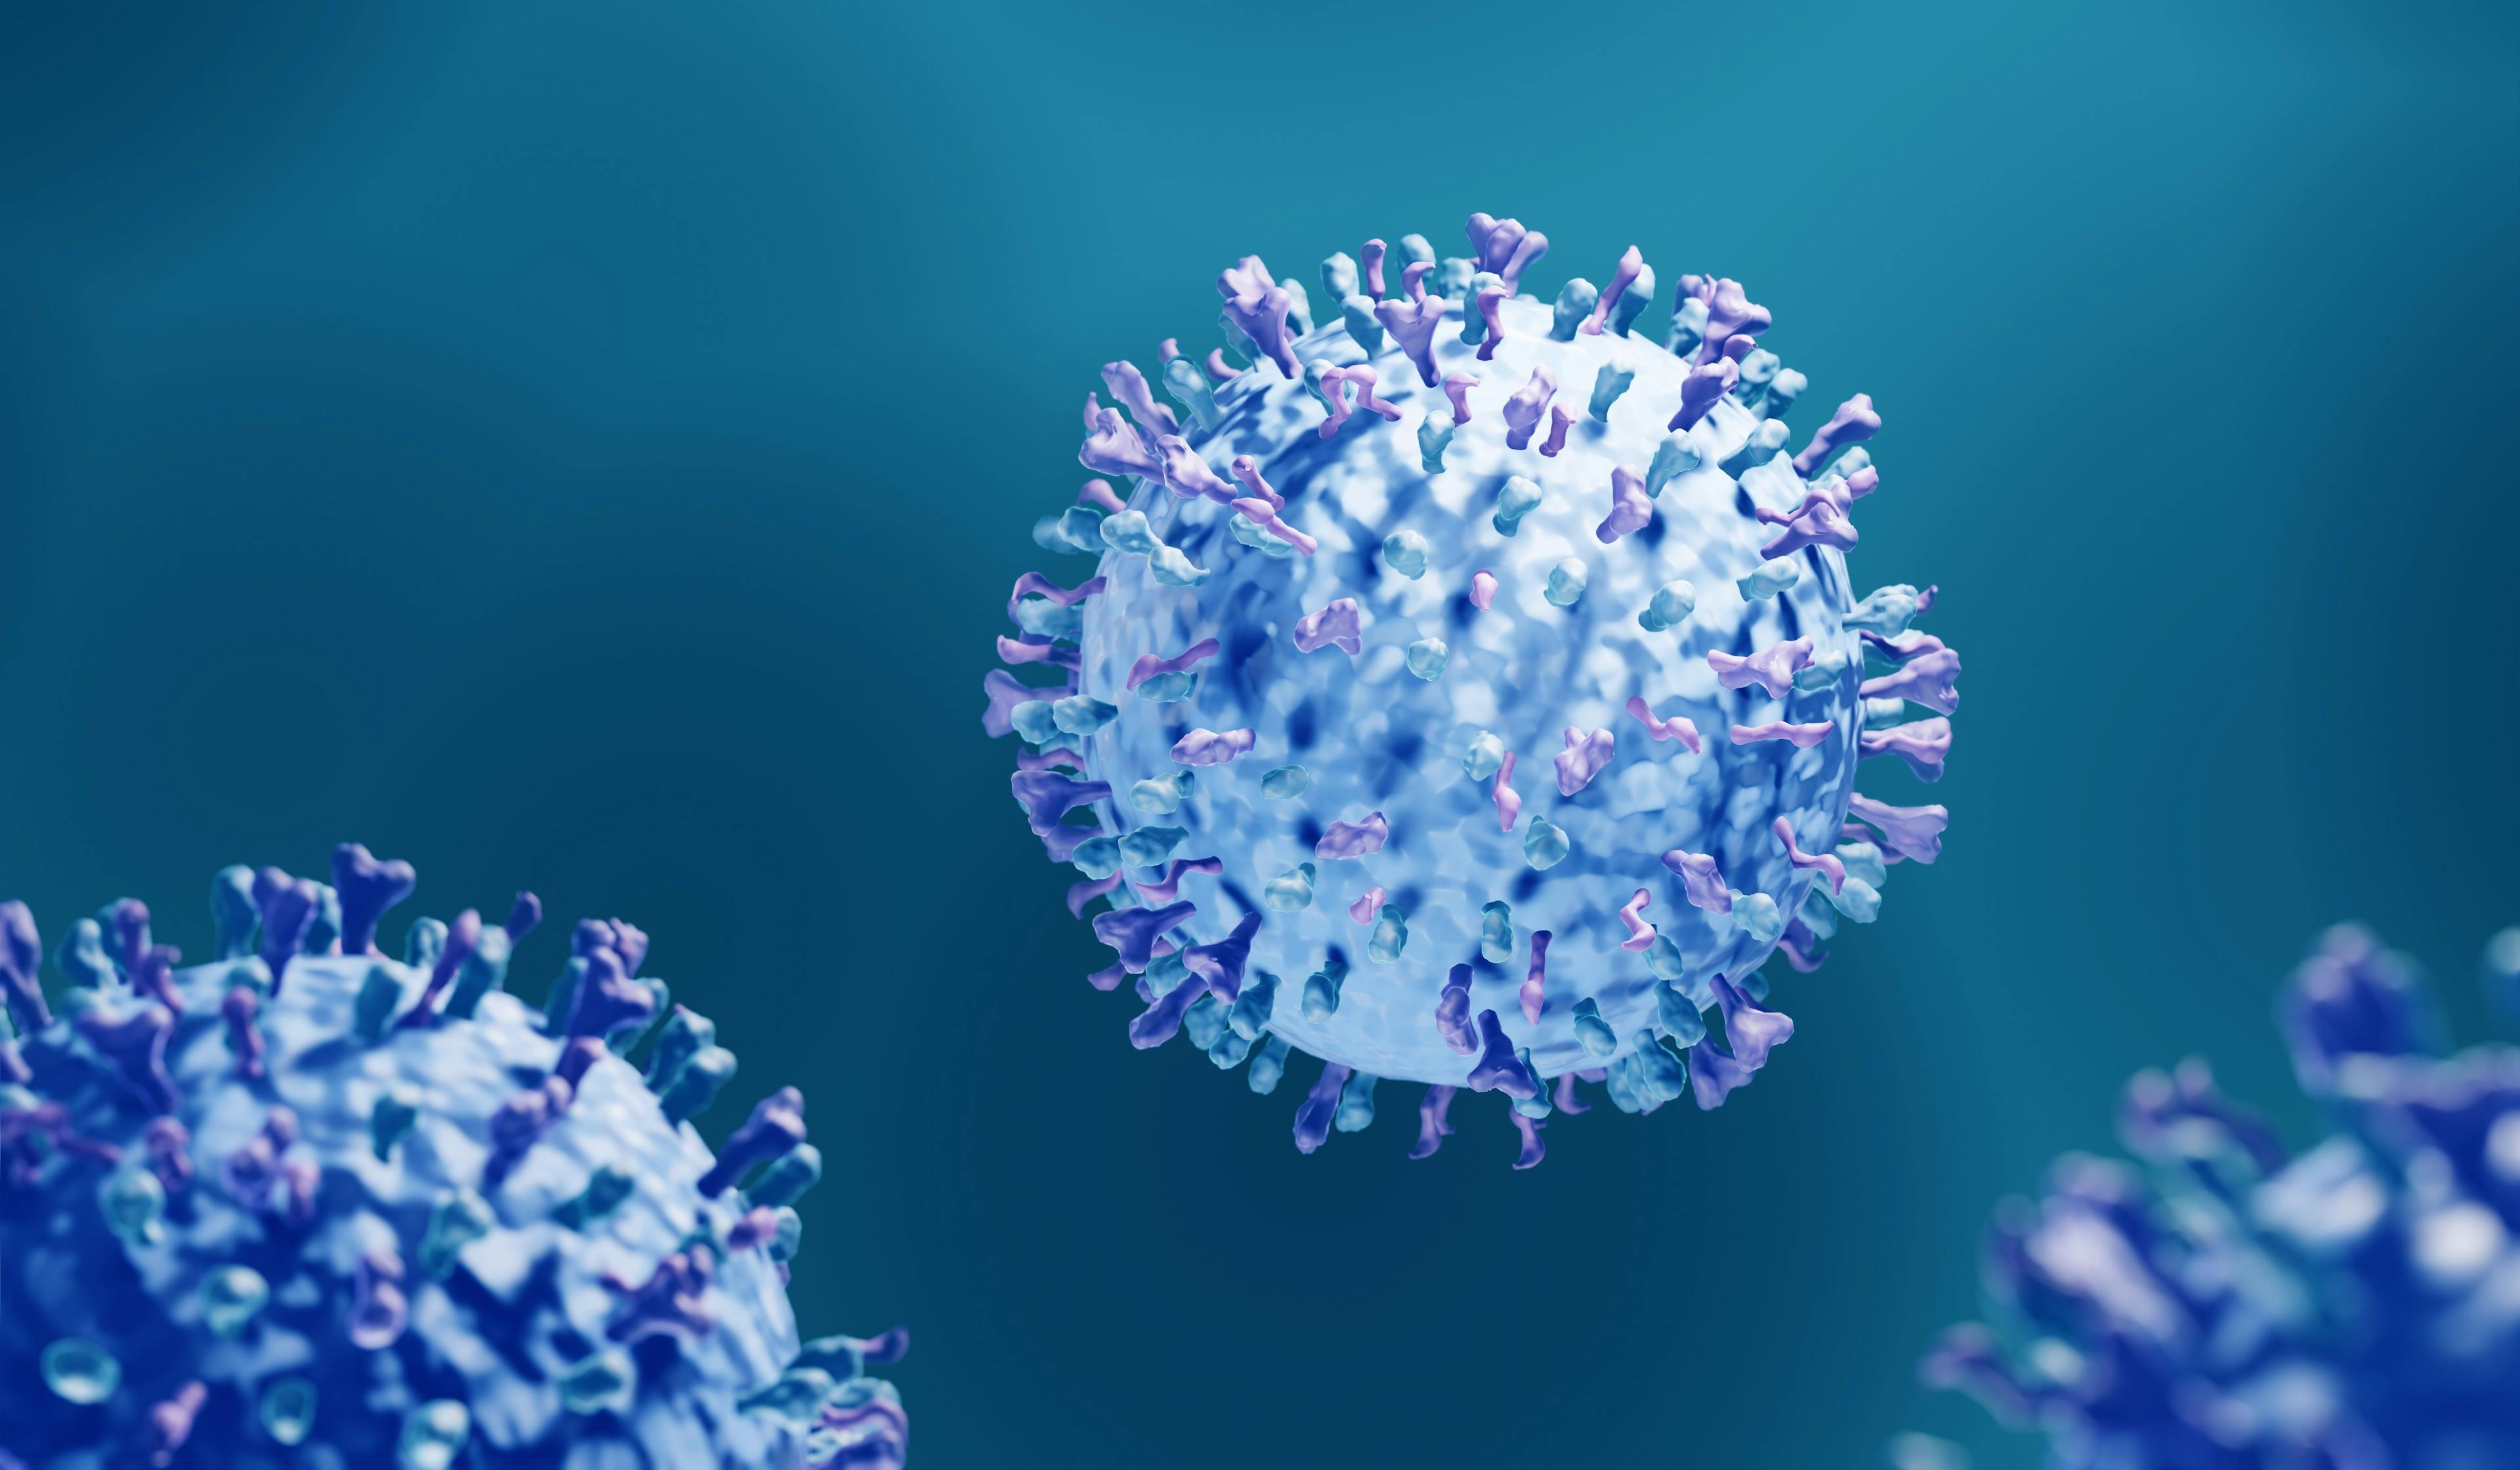 Infectious viruses such as respiratory syncytial virus (RSV) causing respiratory infections - Image credit: Artur | stock.adobe.com